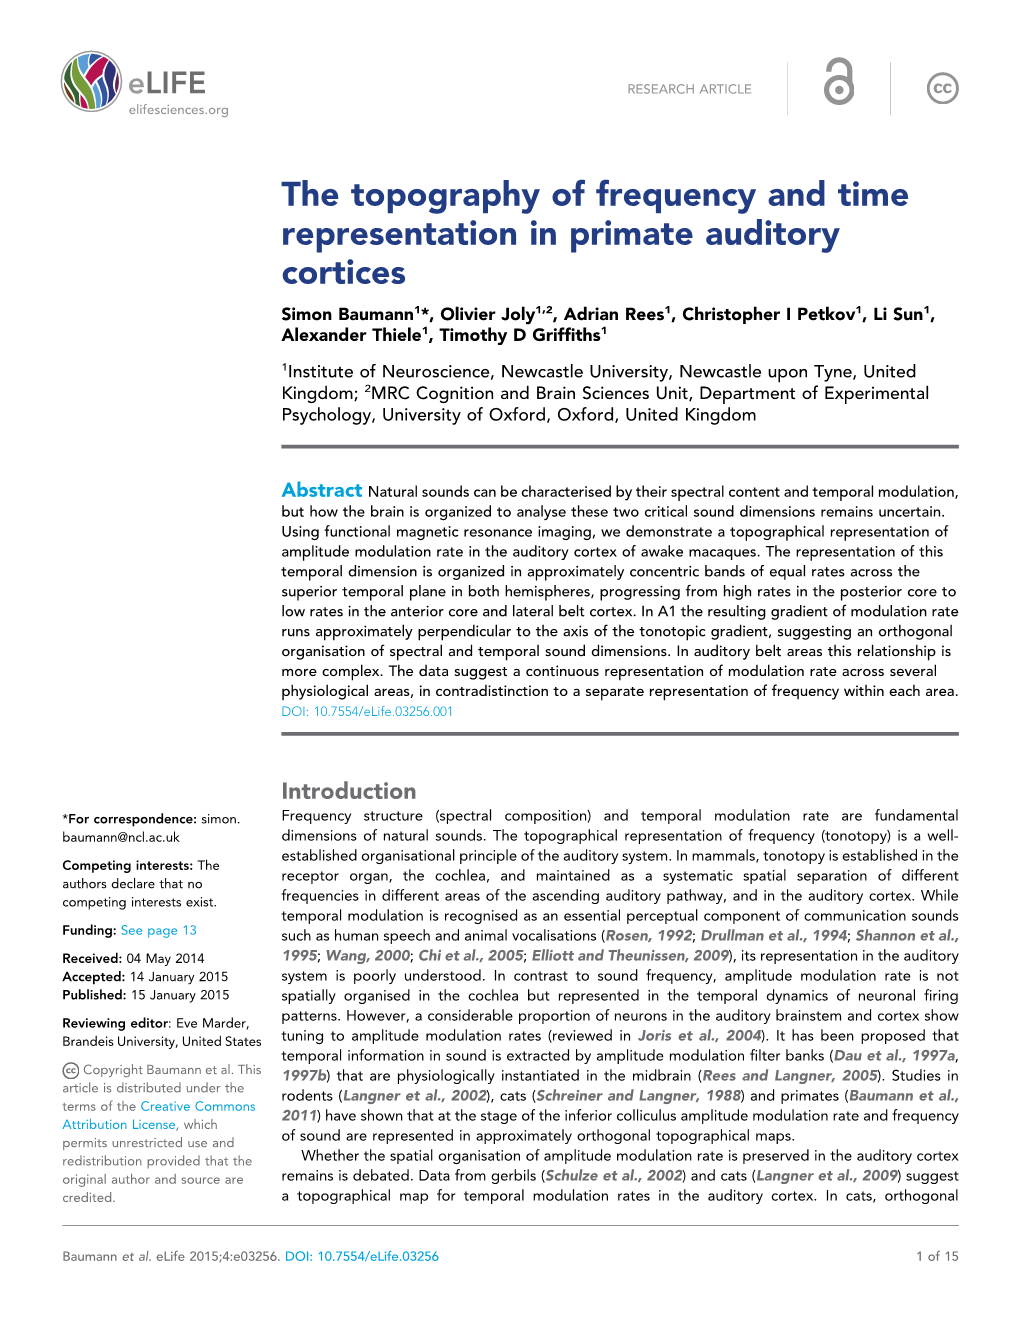 The Topography of Frequency and Time Representation in Primate Auditory